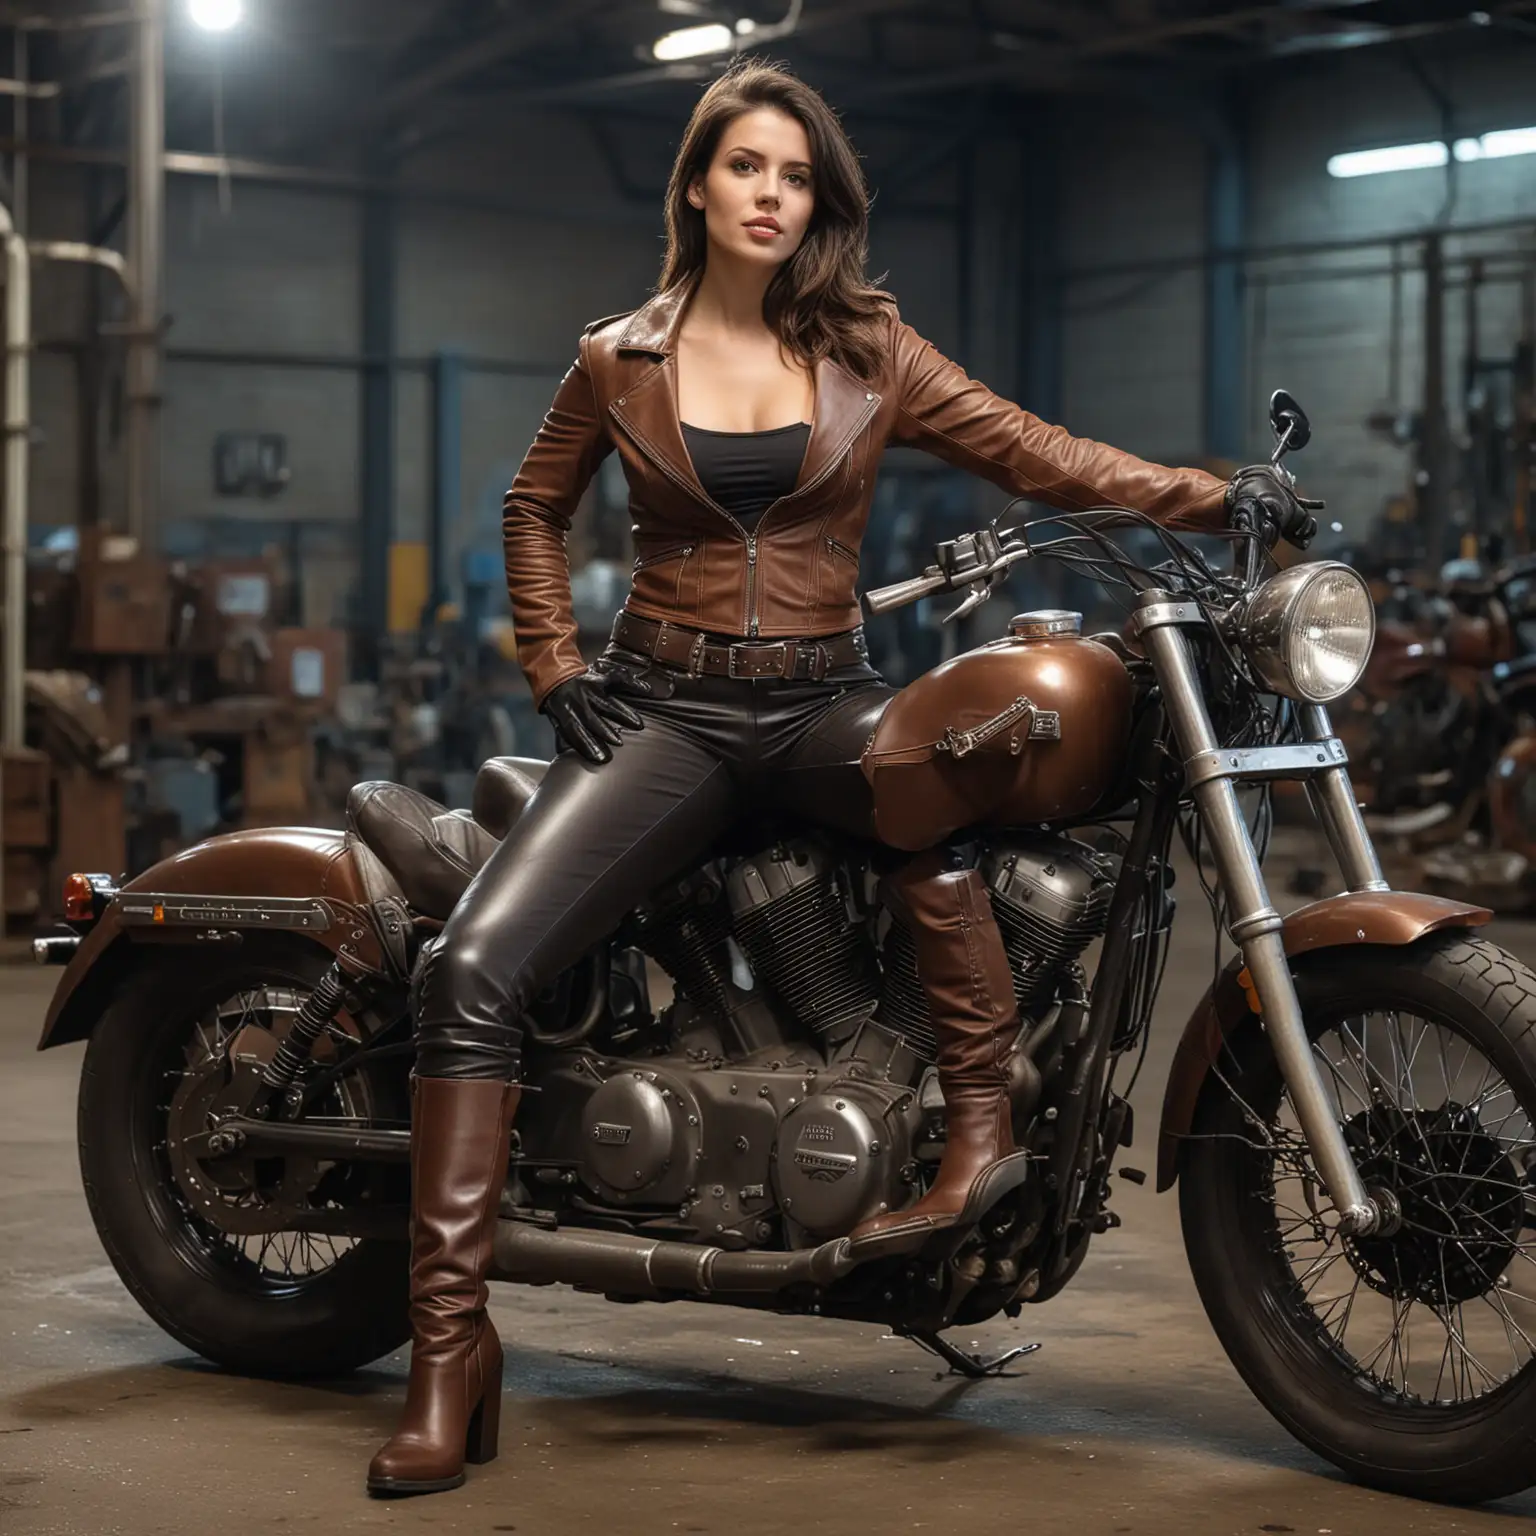 a brunette girl, in her 30-ies, sitting on a harley motorbike, wearing leather pants and high heeled kneeboots, a revealing brown leather bikini and leather gloves, looking straight into the camera, her bike is parked in an old factory at night